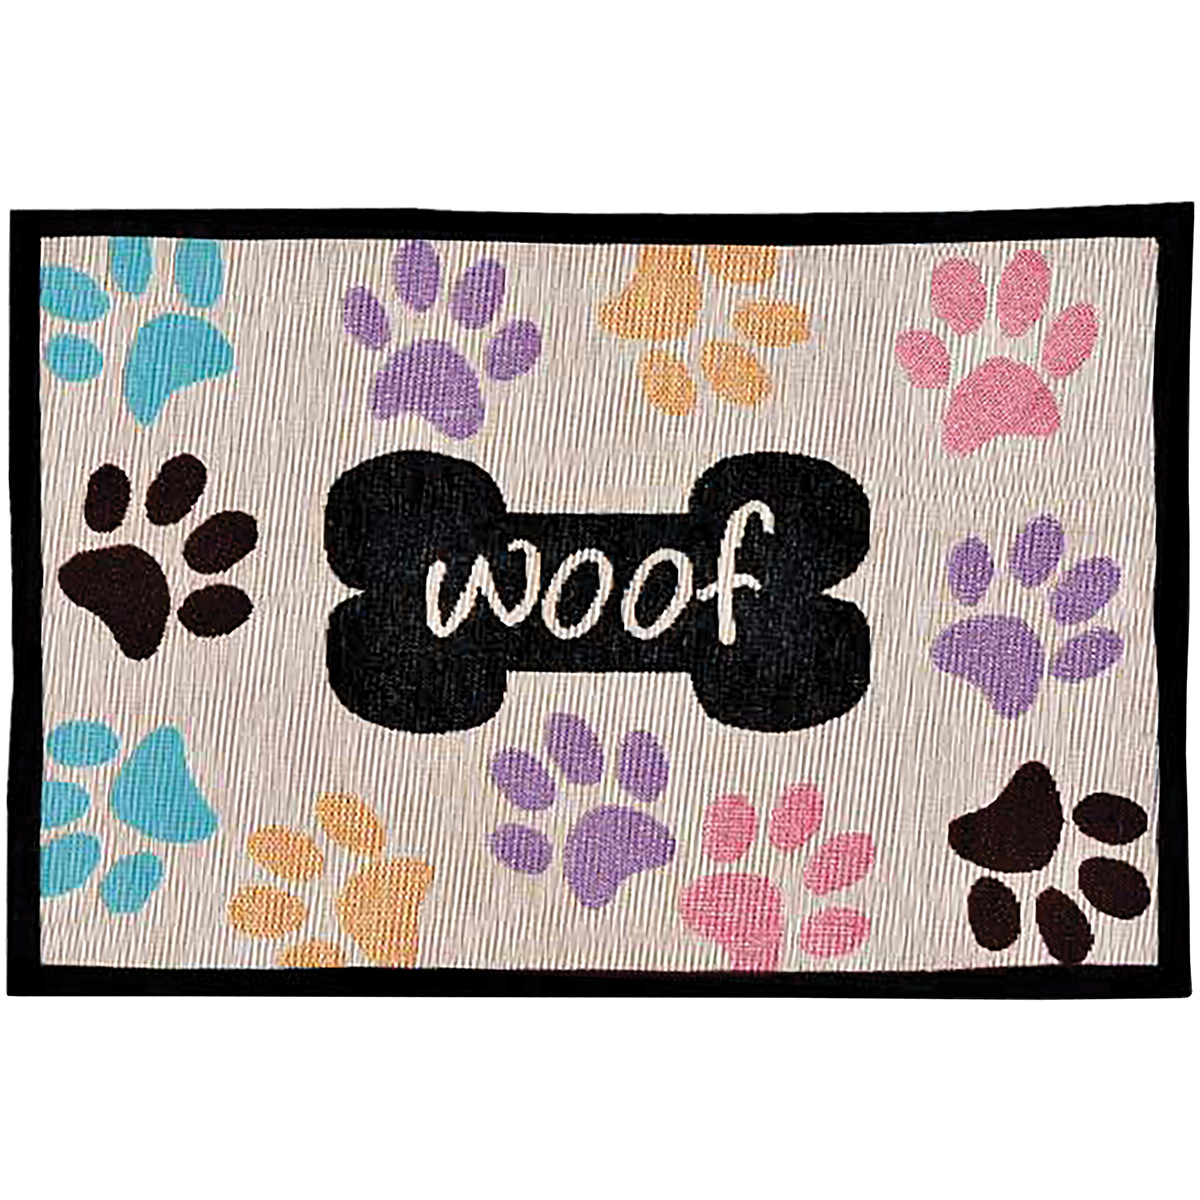 Lp7576 Bella Fashion Mats 12.75 X 19 In., Woof With Multi Paws